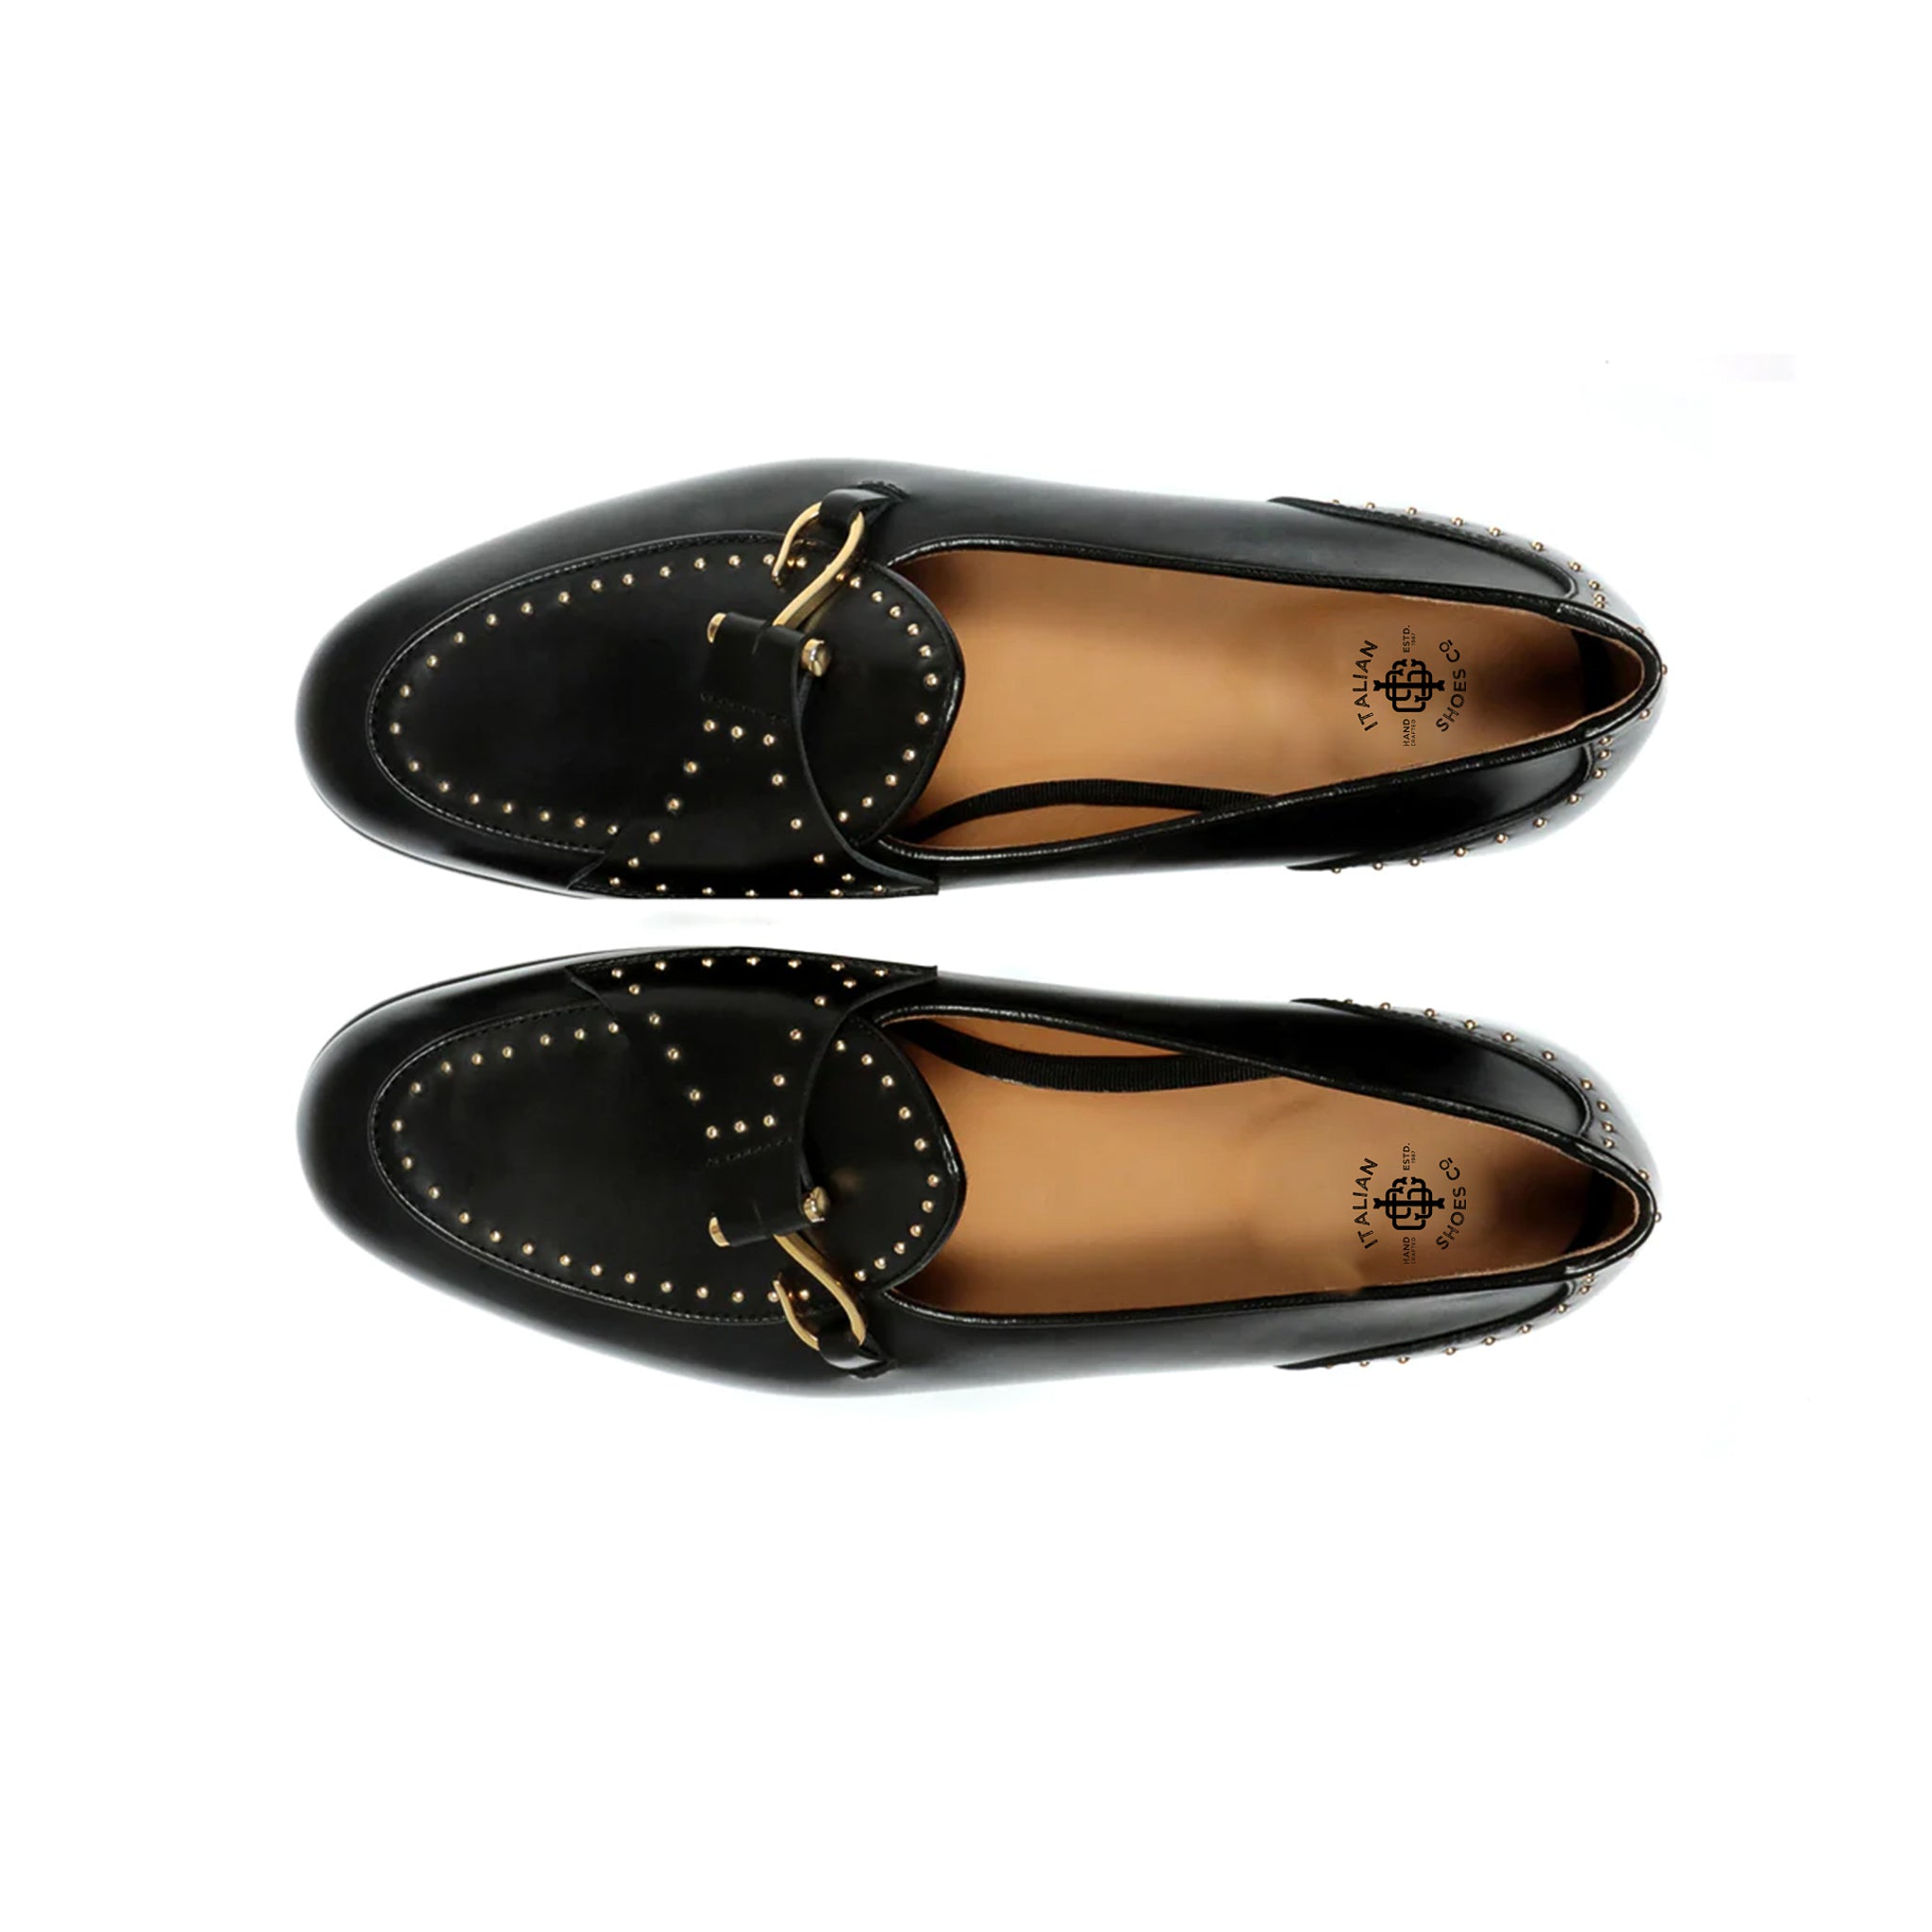 Elias Studded Men's Loafers